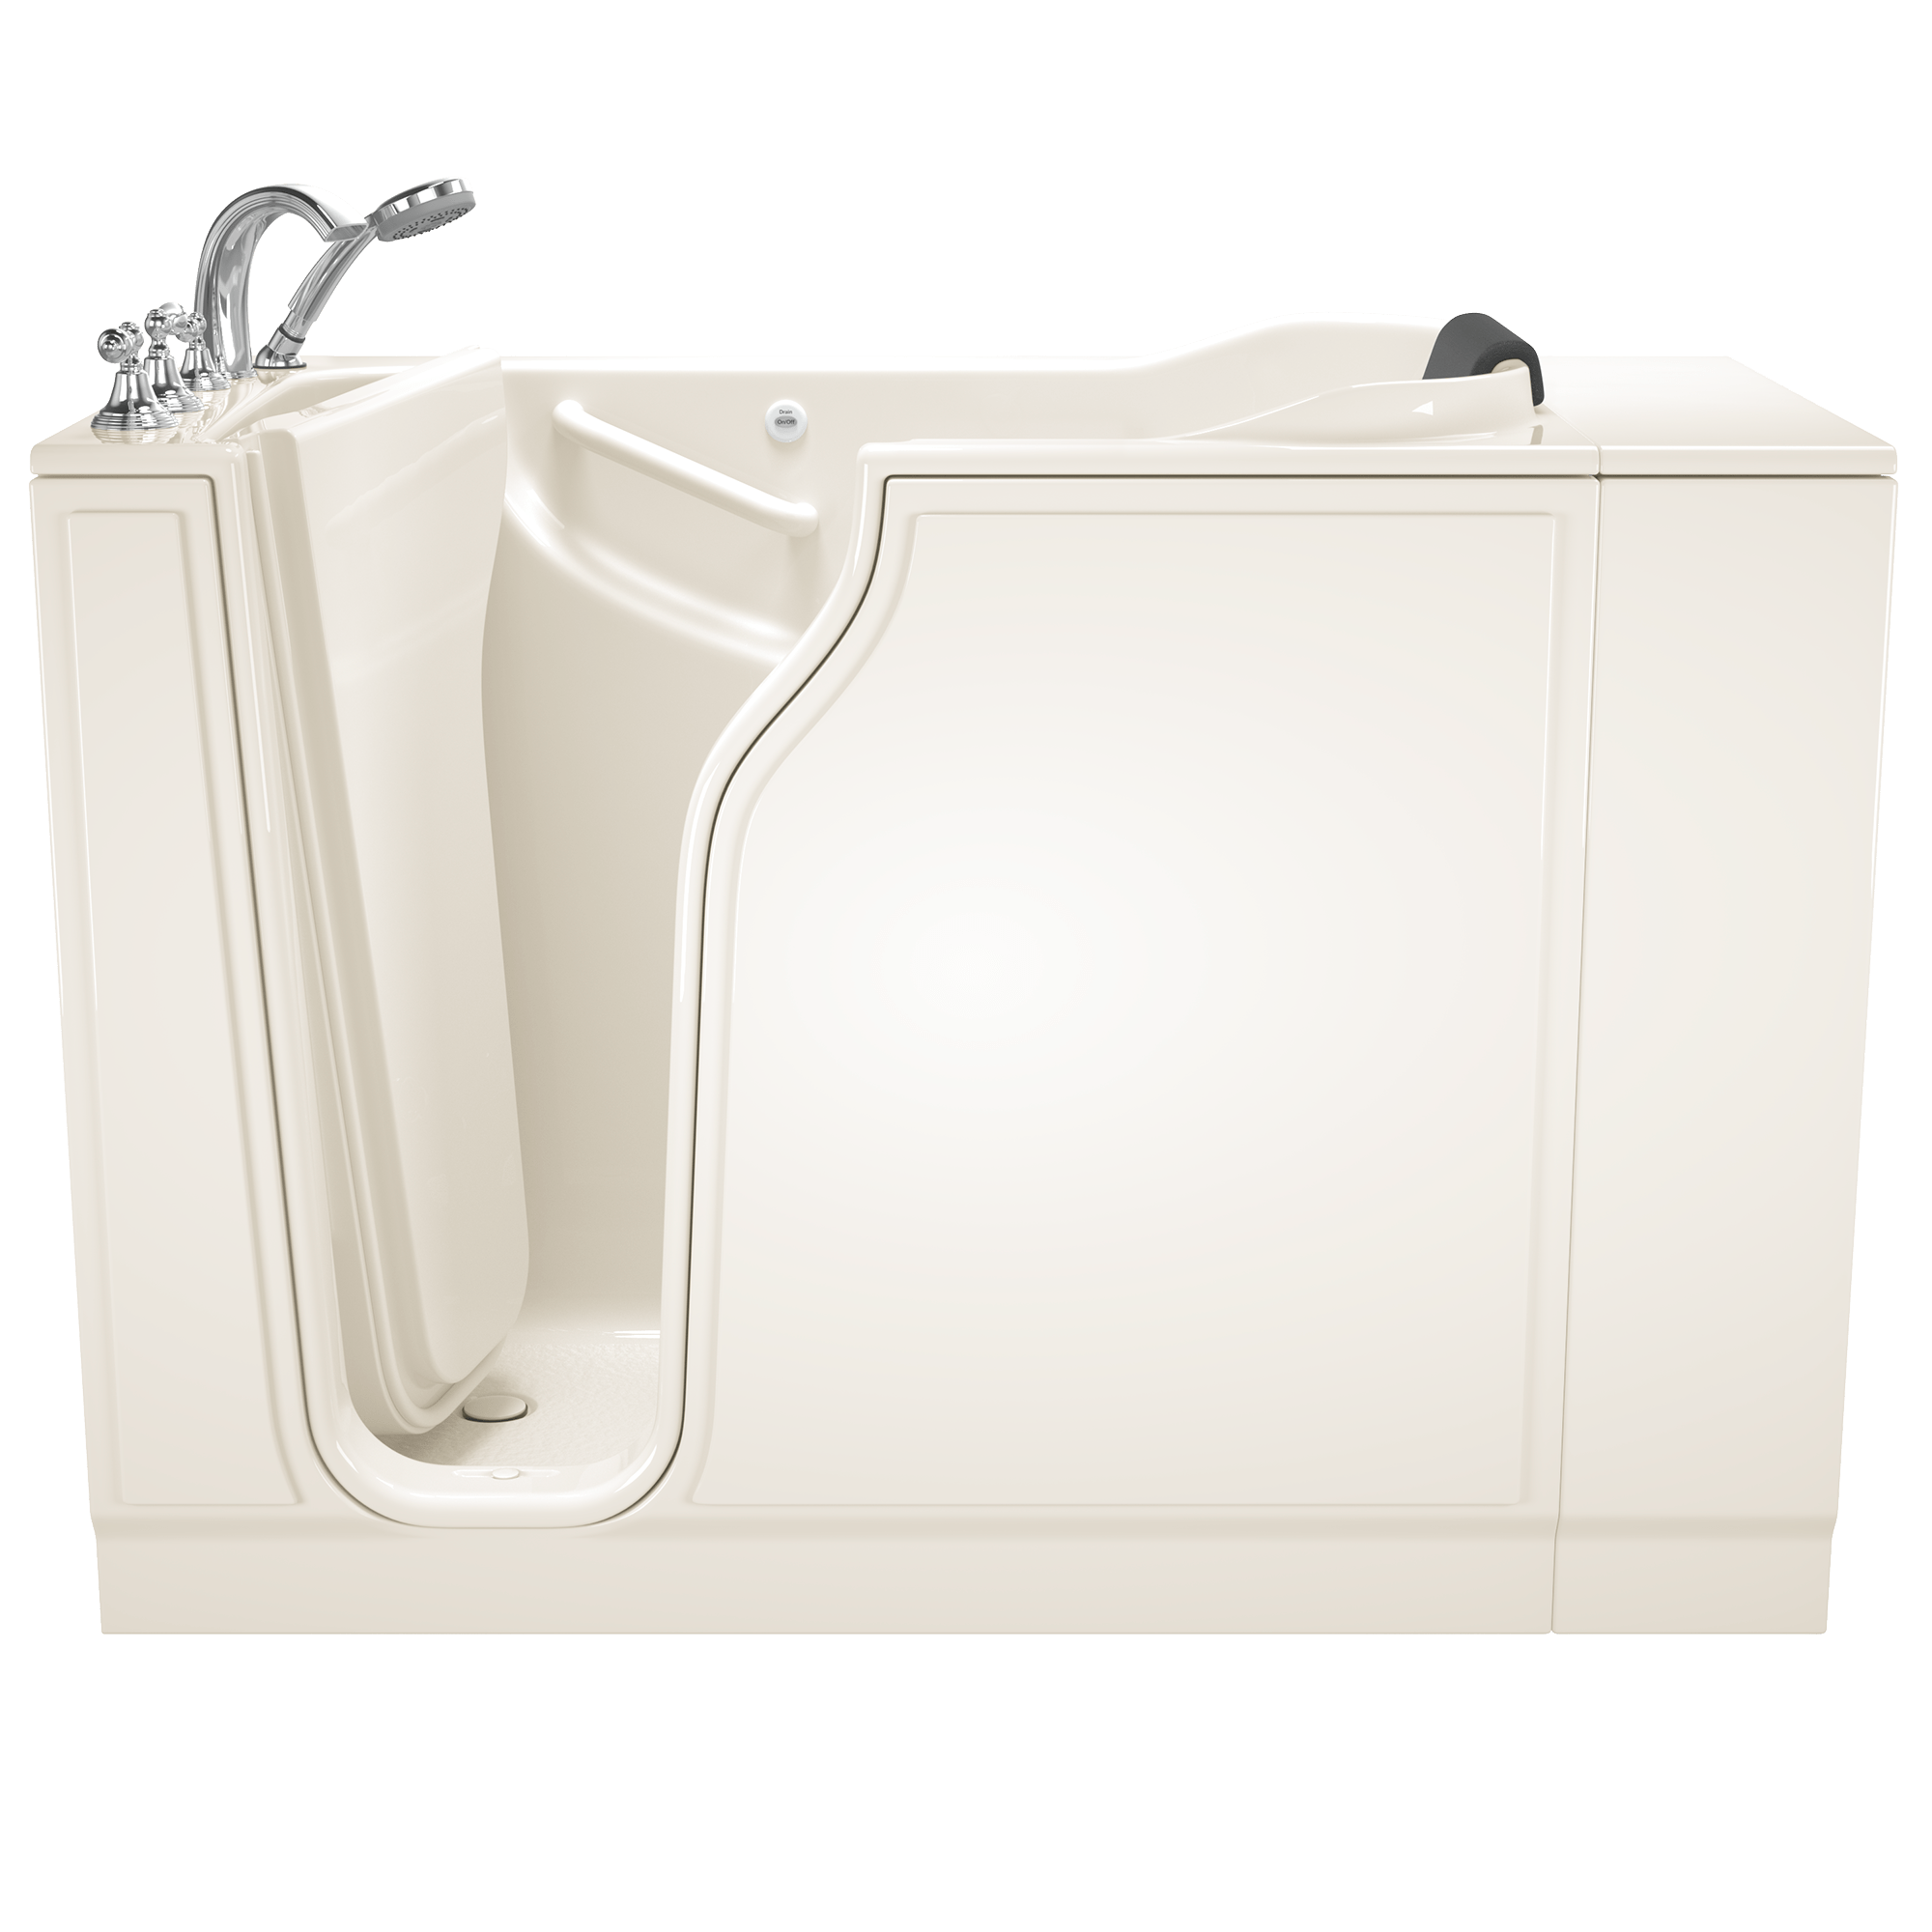 Gelcoat Premium Series 30 x 52  Inch Walk in Tub With Soaker System   Left Hand Drain With Faucet WIB LINEN